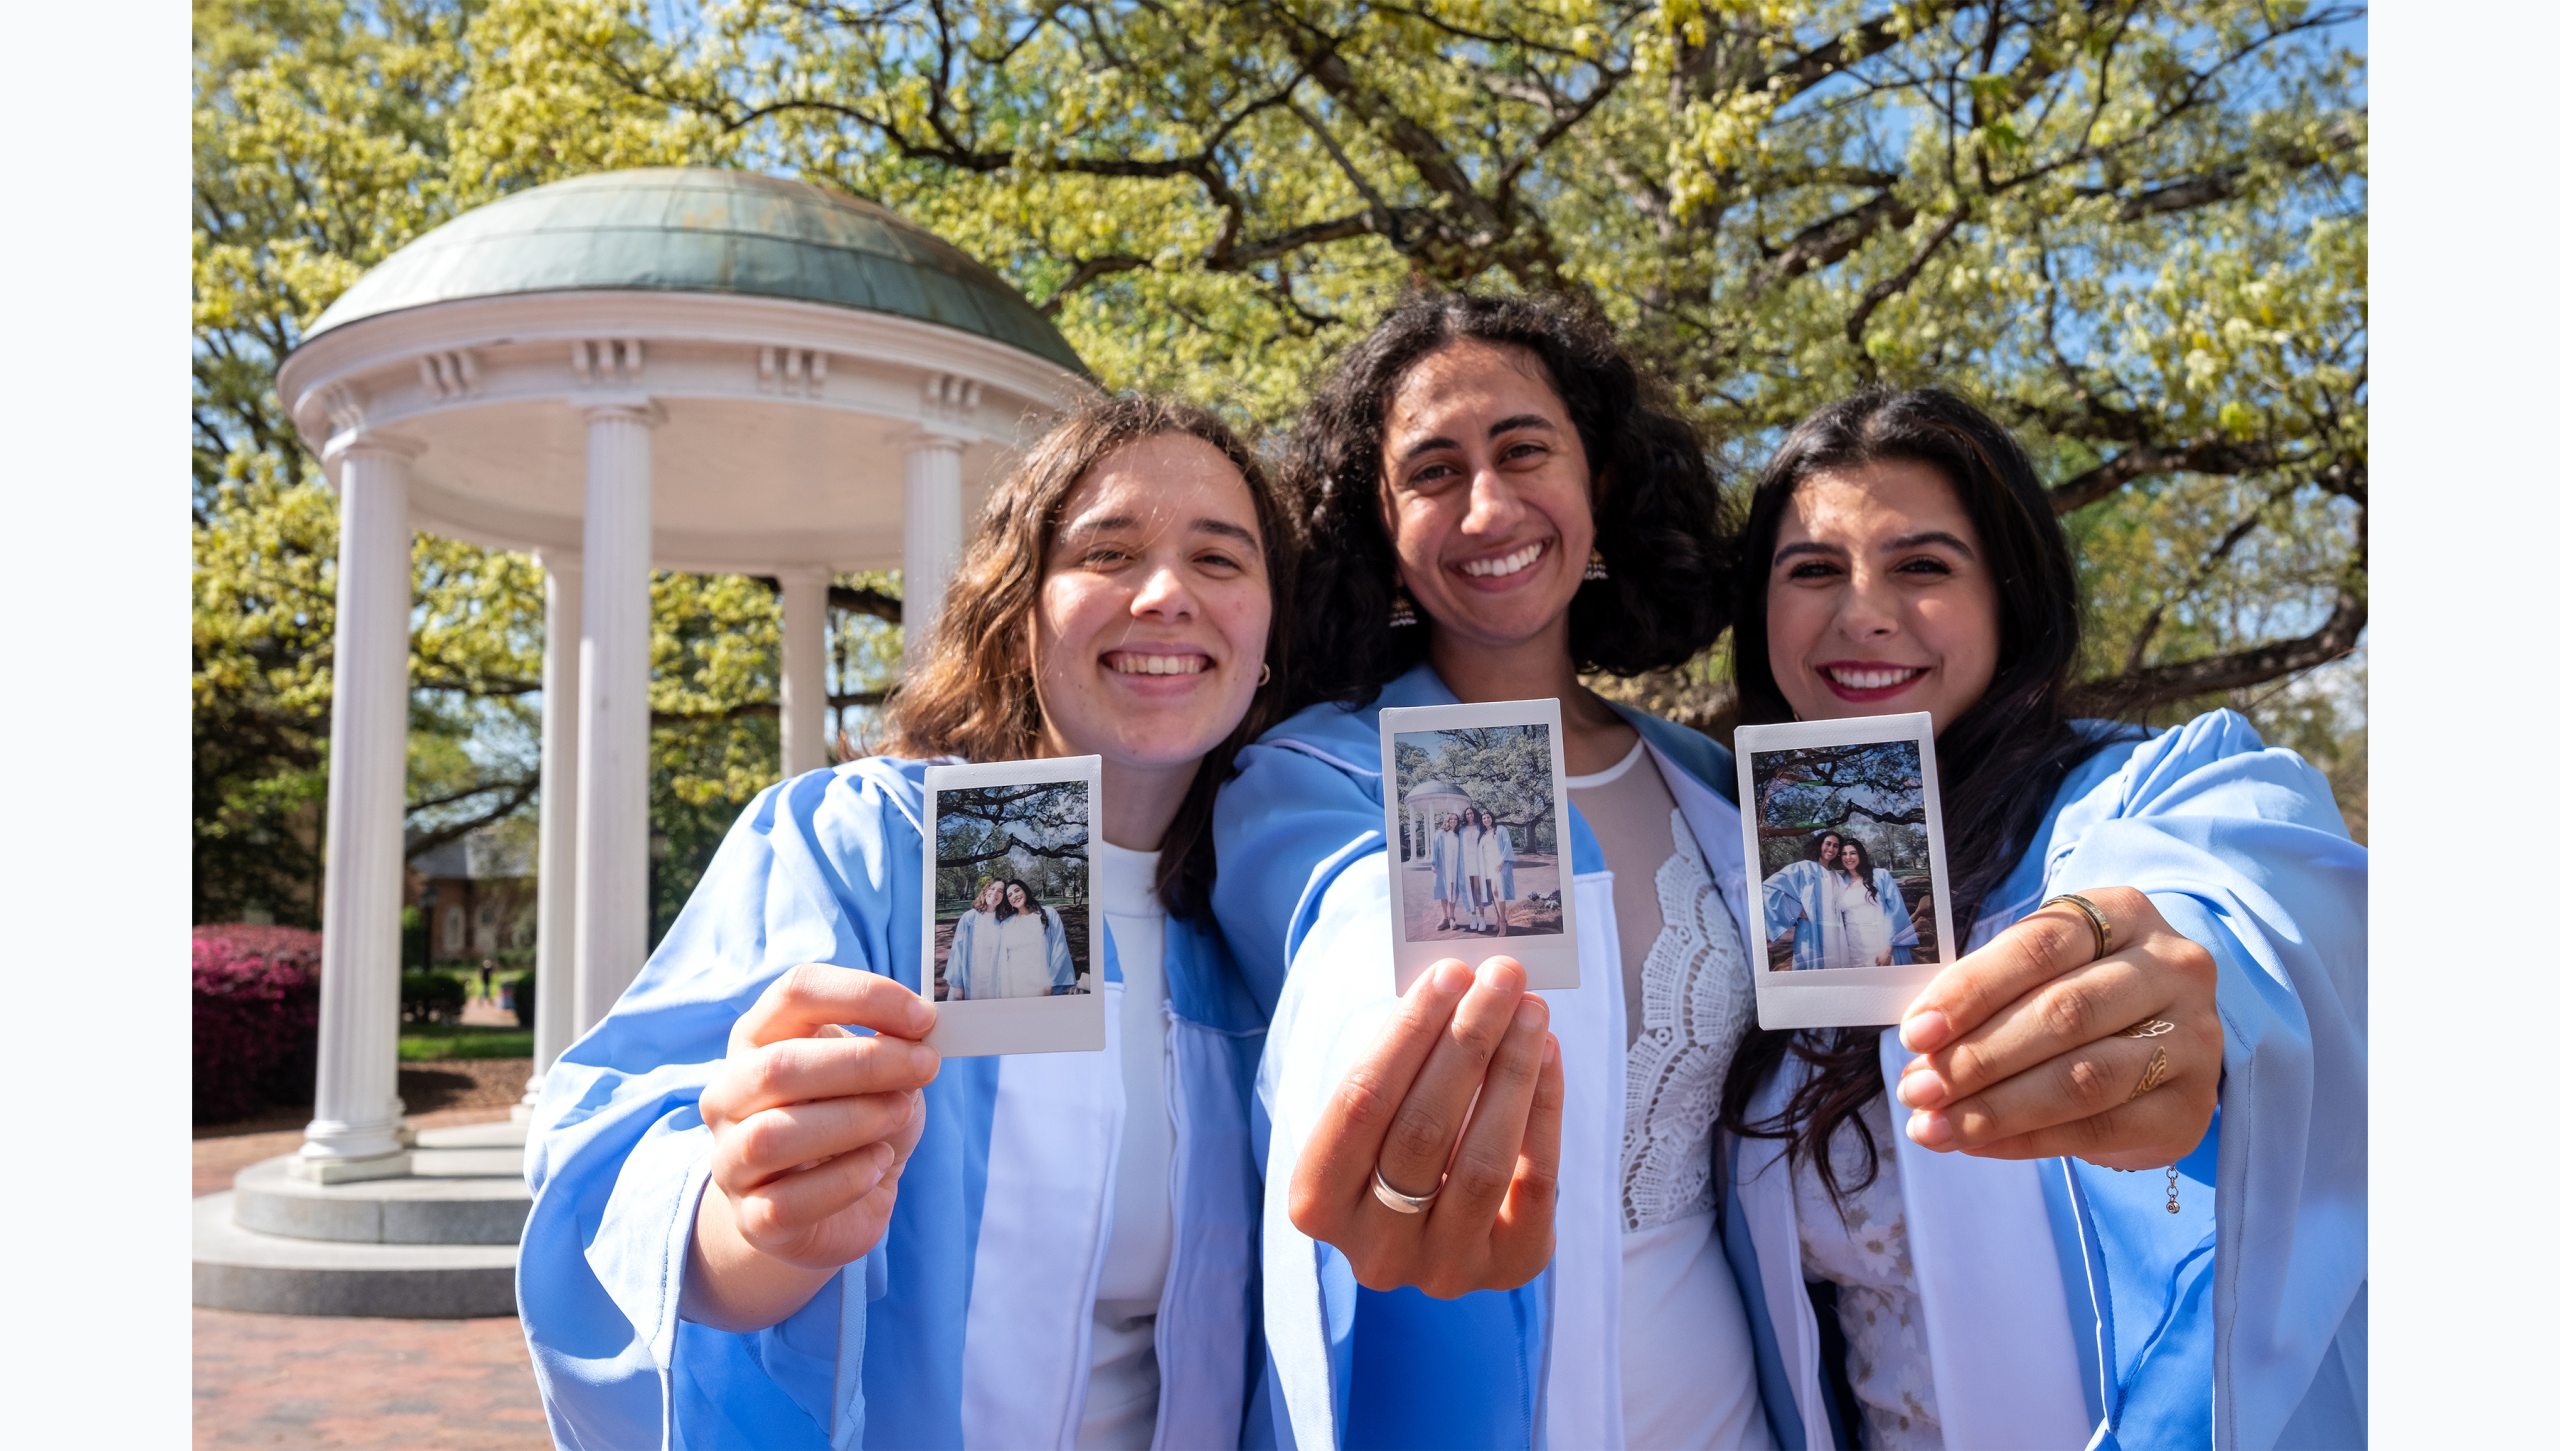 Three students holding up film photos of themselves in caps and gowns.